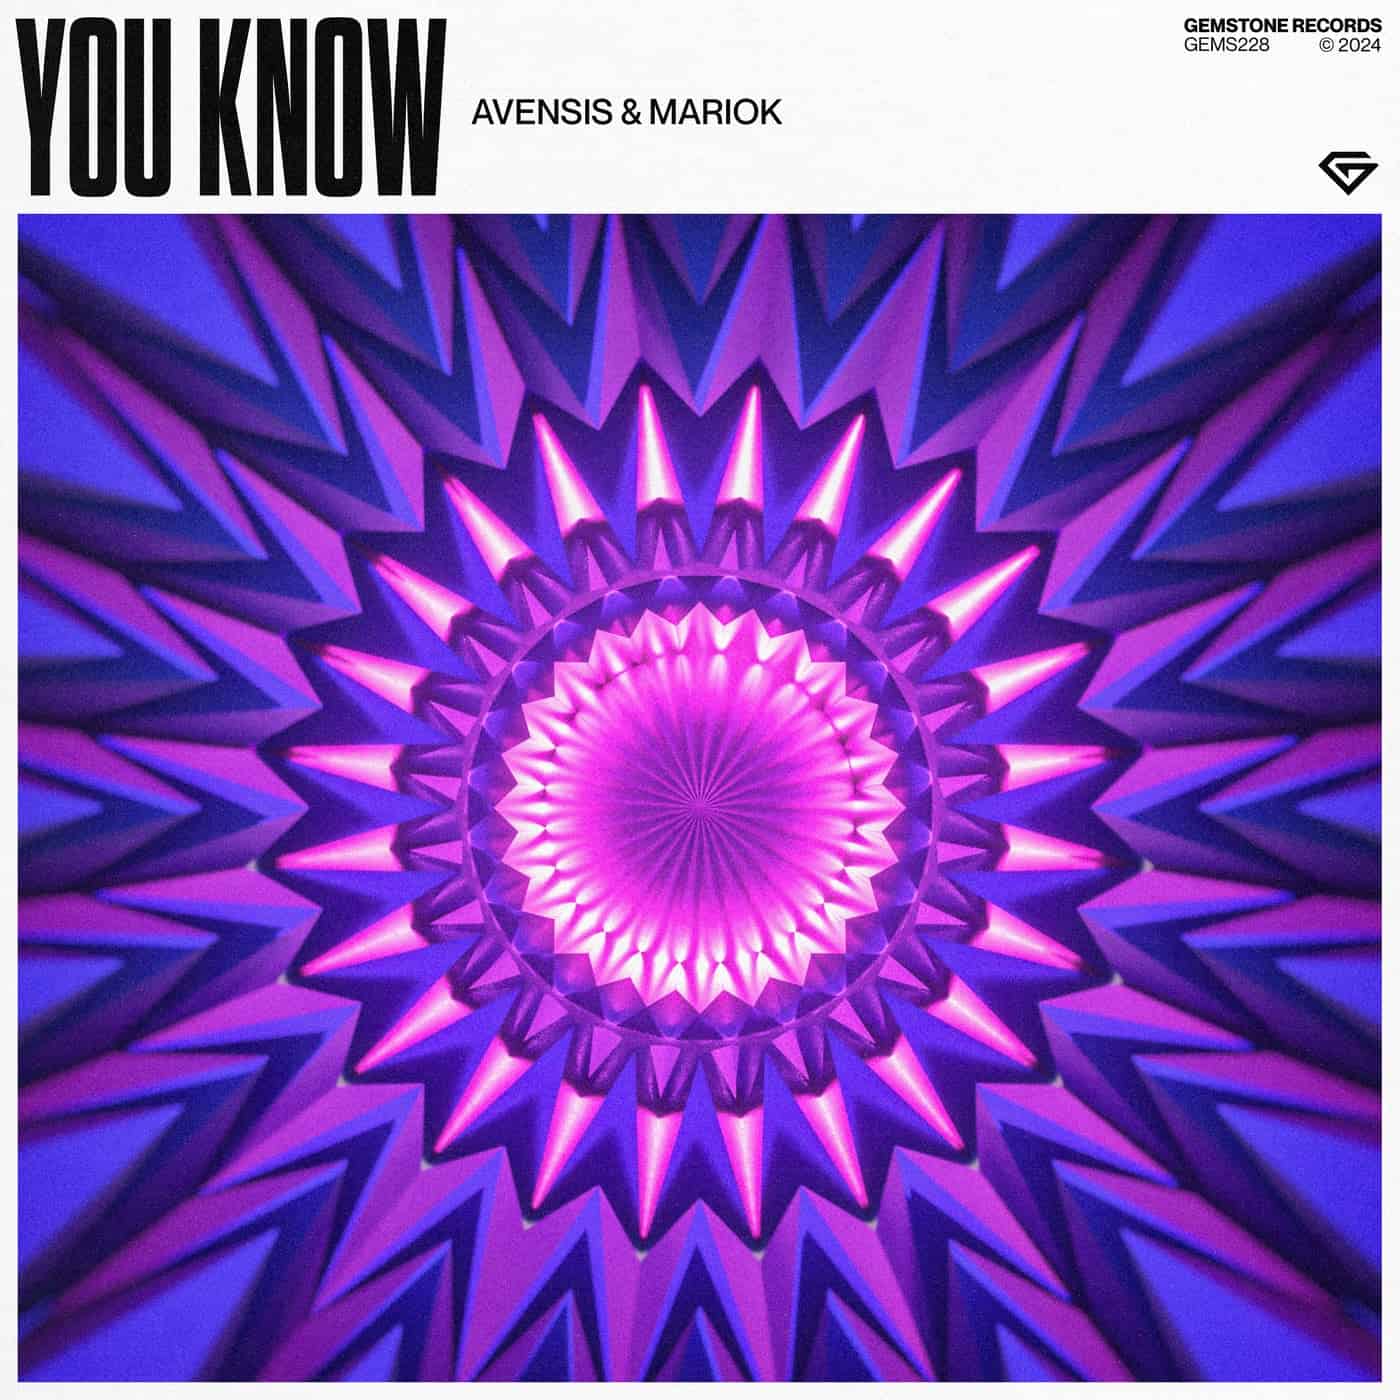 image cover: Avensis, Mariok - You Know on Gemstone Records